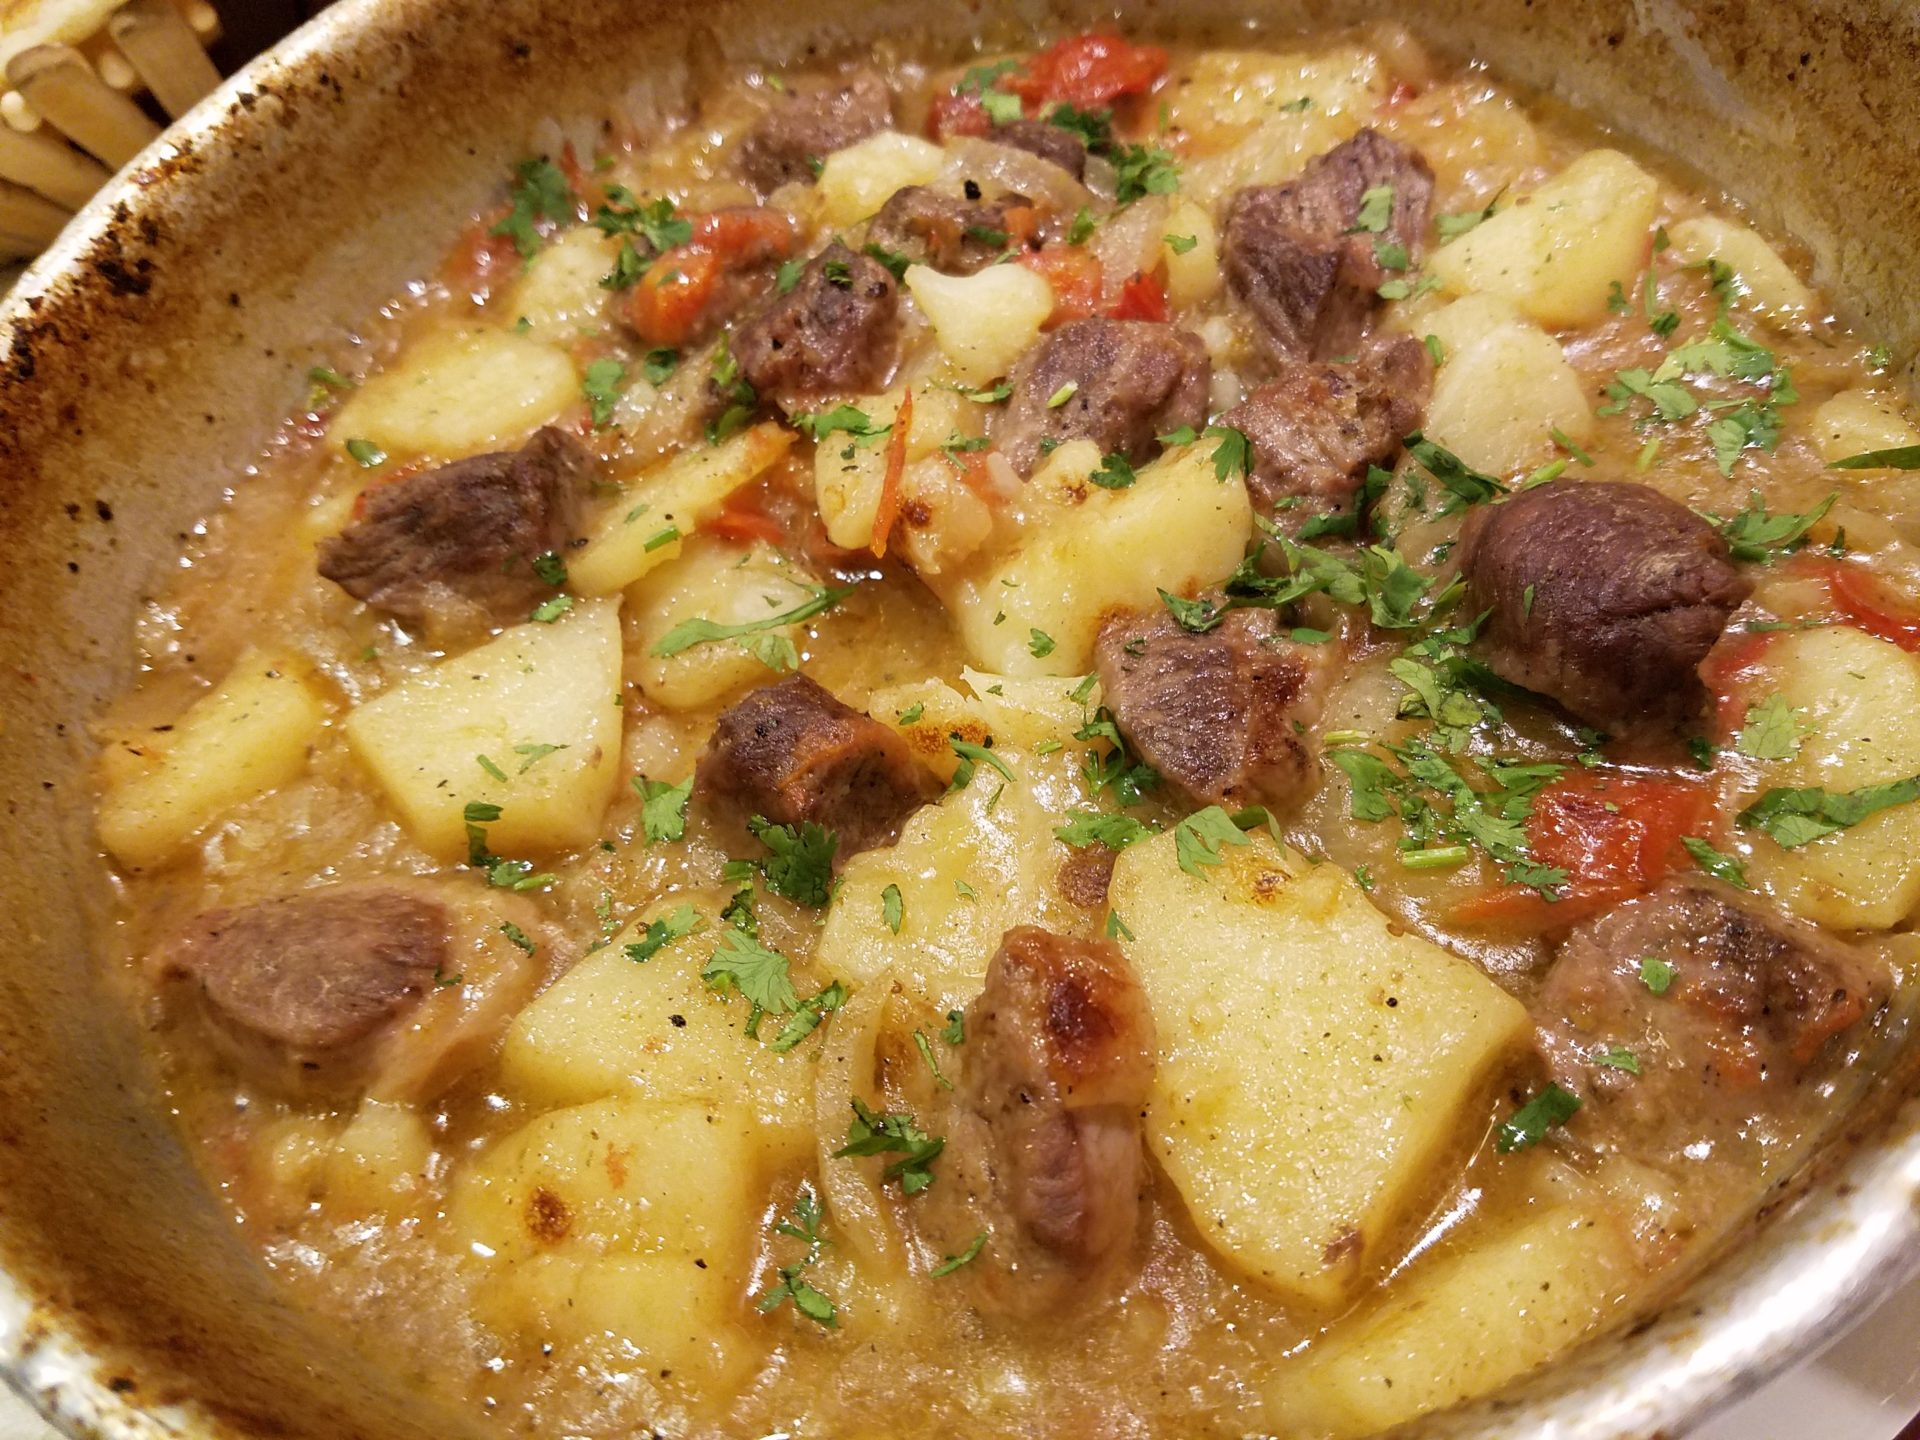 a bowl of food with meat and potatoes